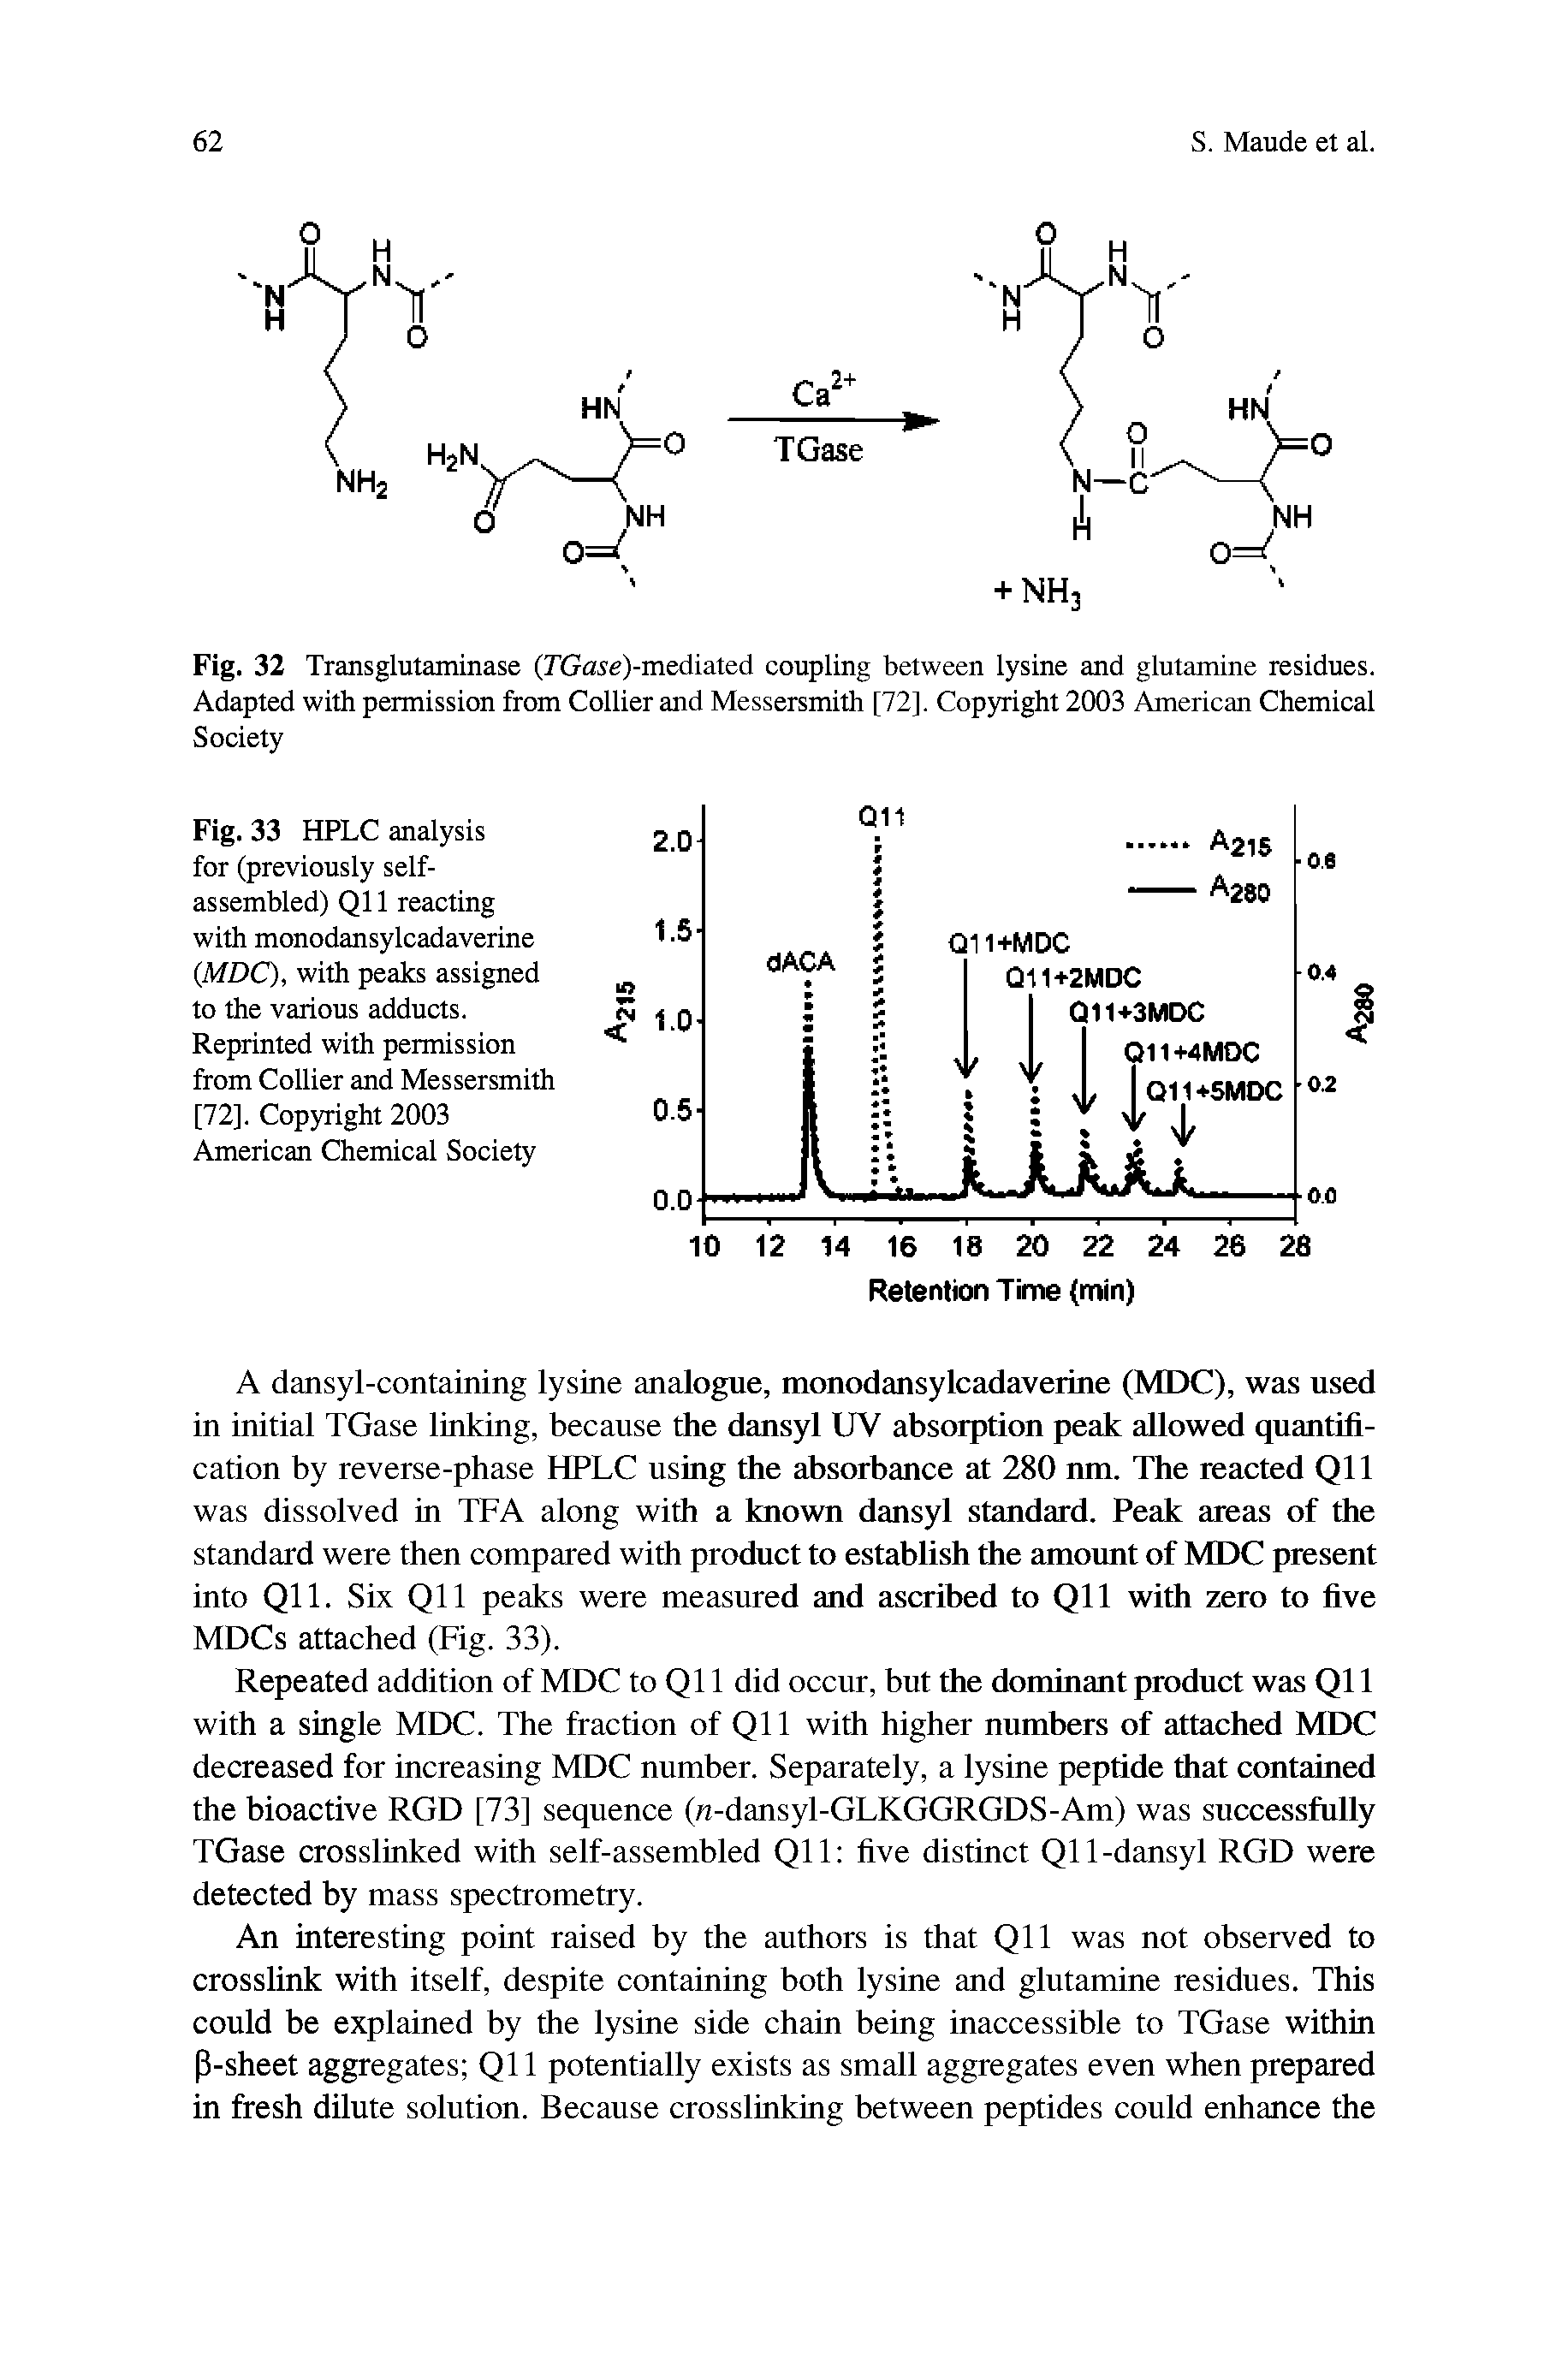 Fig. 32 Transglutaminase (rGare)-mediated coupling between lysine and glutamine residues. Adapted with permission from Collier and Messersmith [72], Copyright 2003 American Chemical Society...